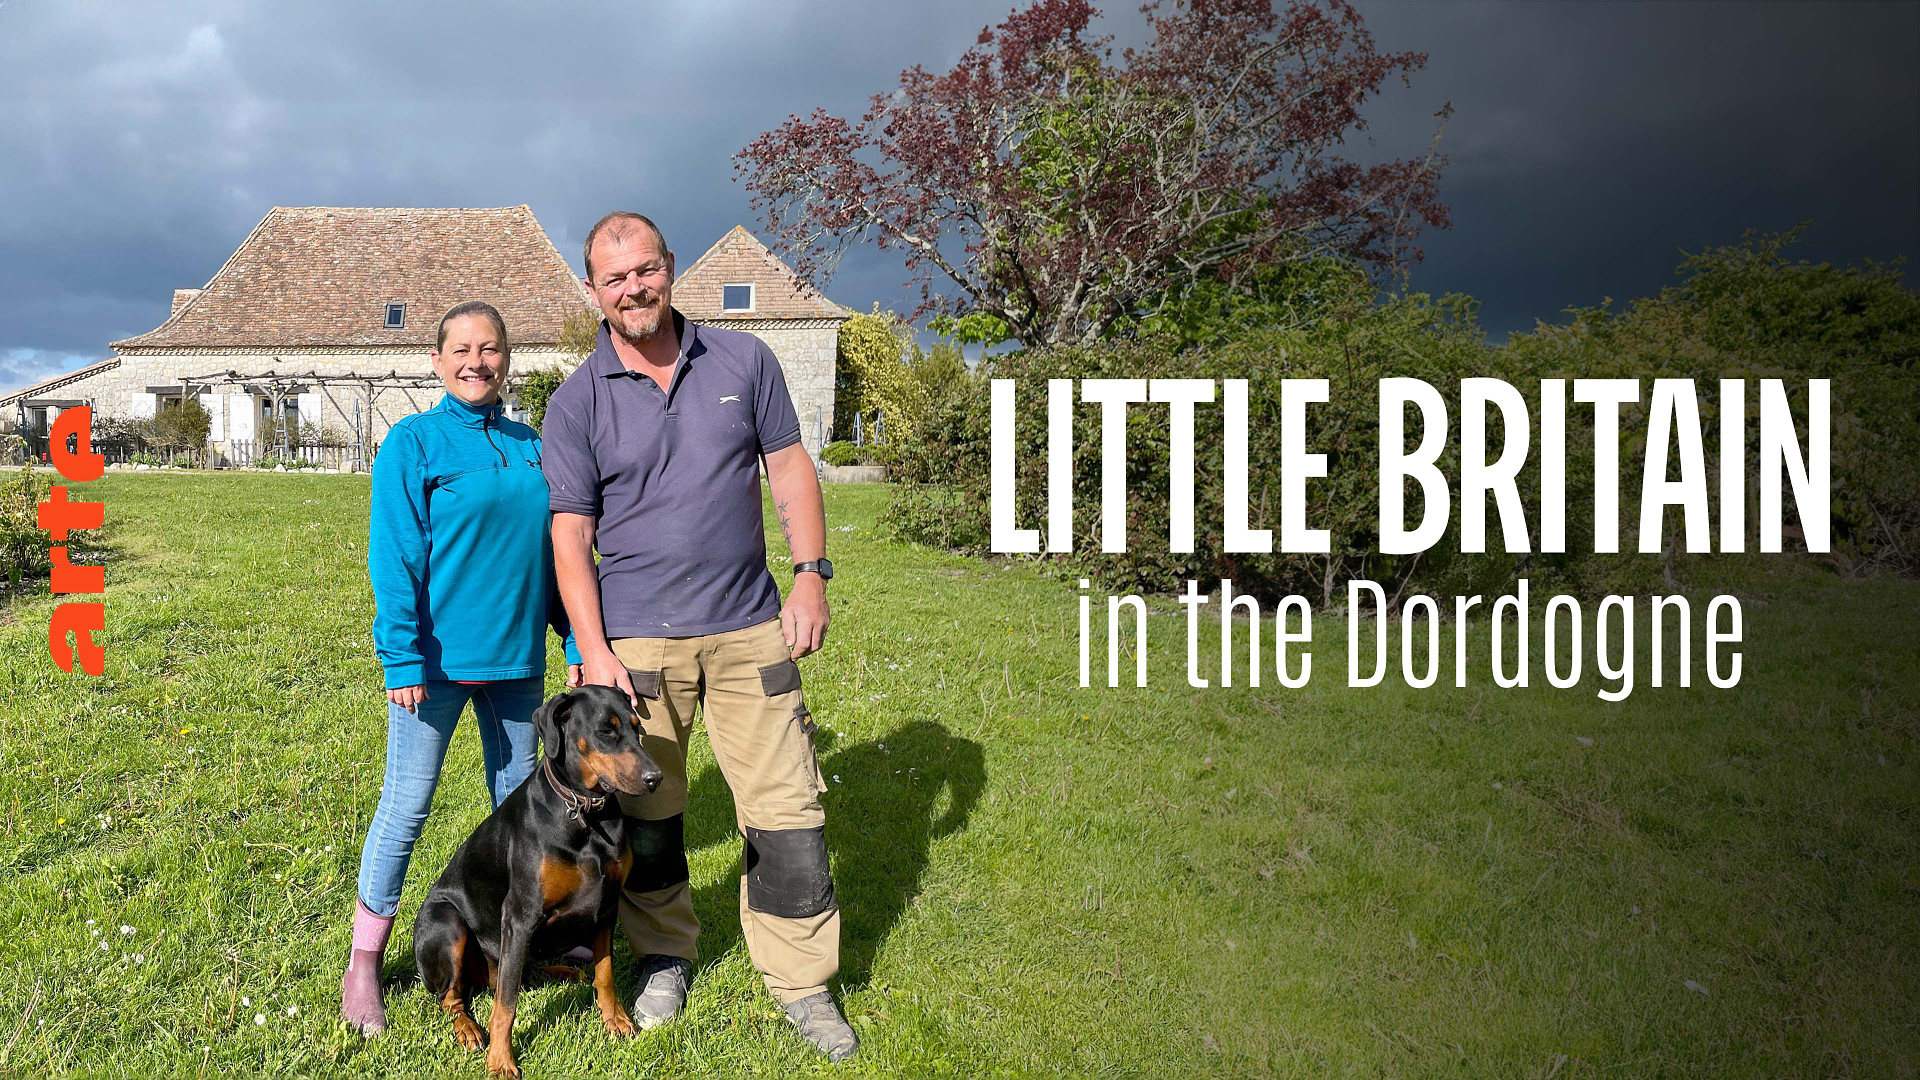 Re: Little Britain in the Dordogne - Watch the full documentary | ARTE in English